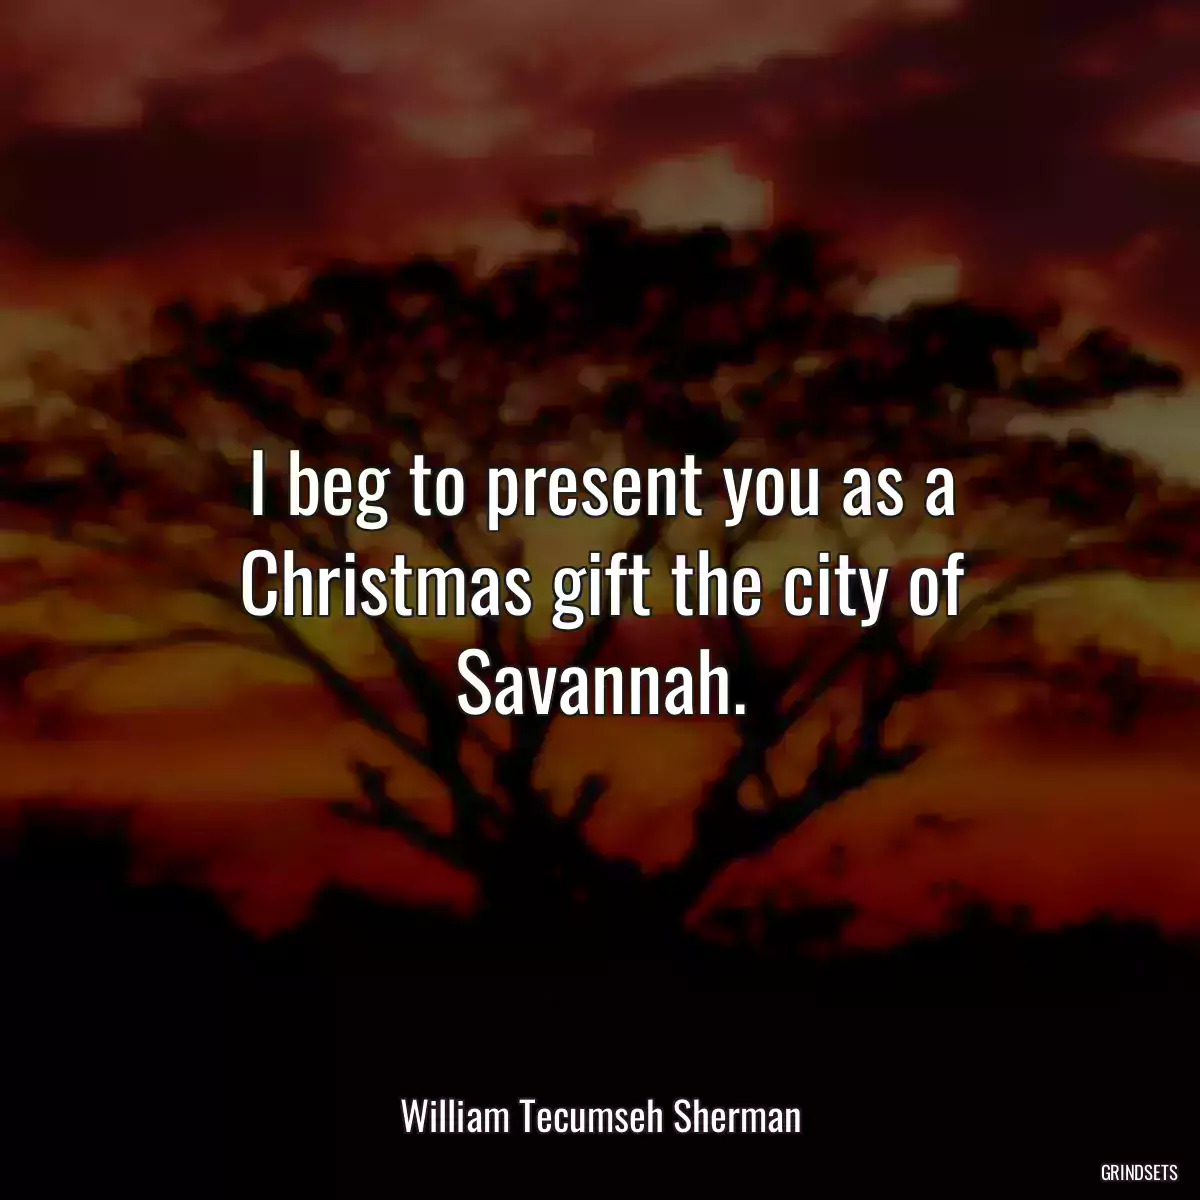 I beg to present you as a Christmas gift the city of Savannah.